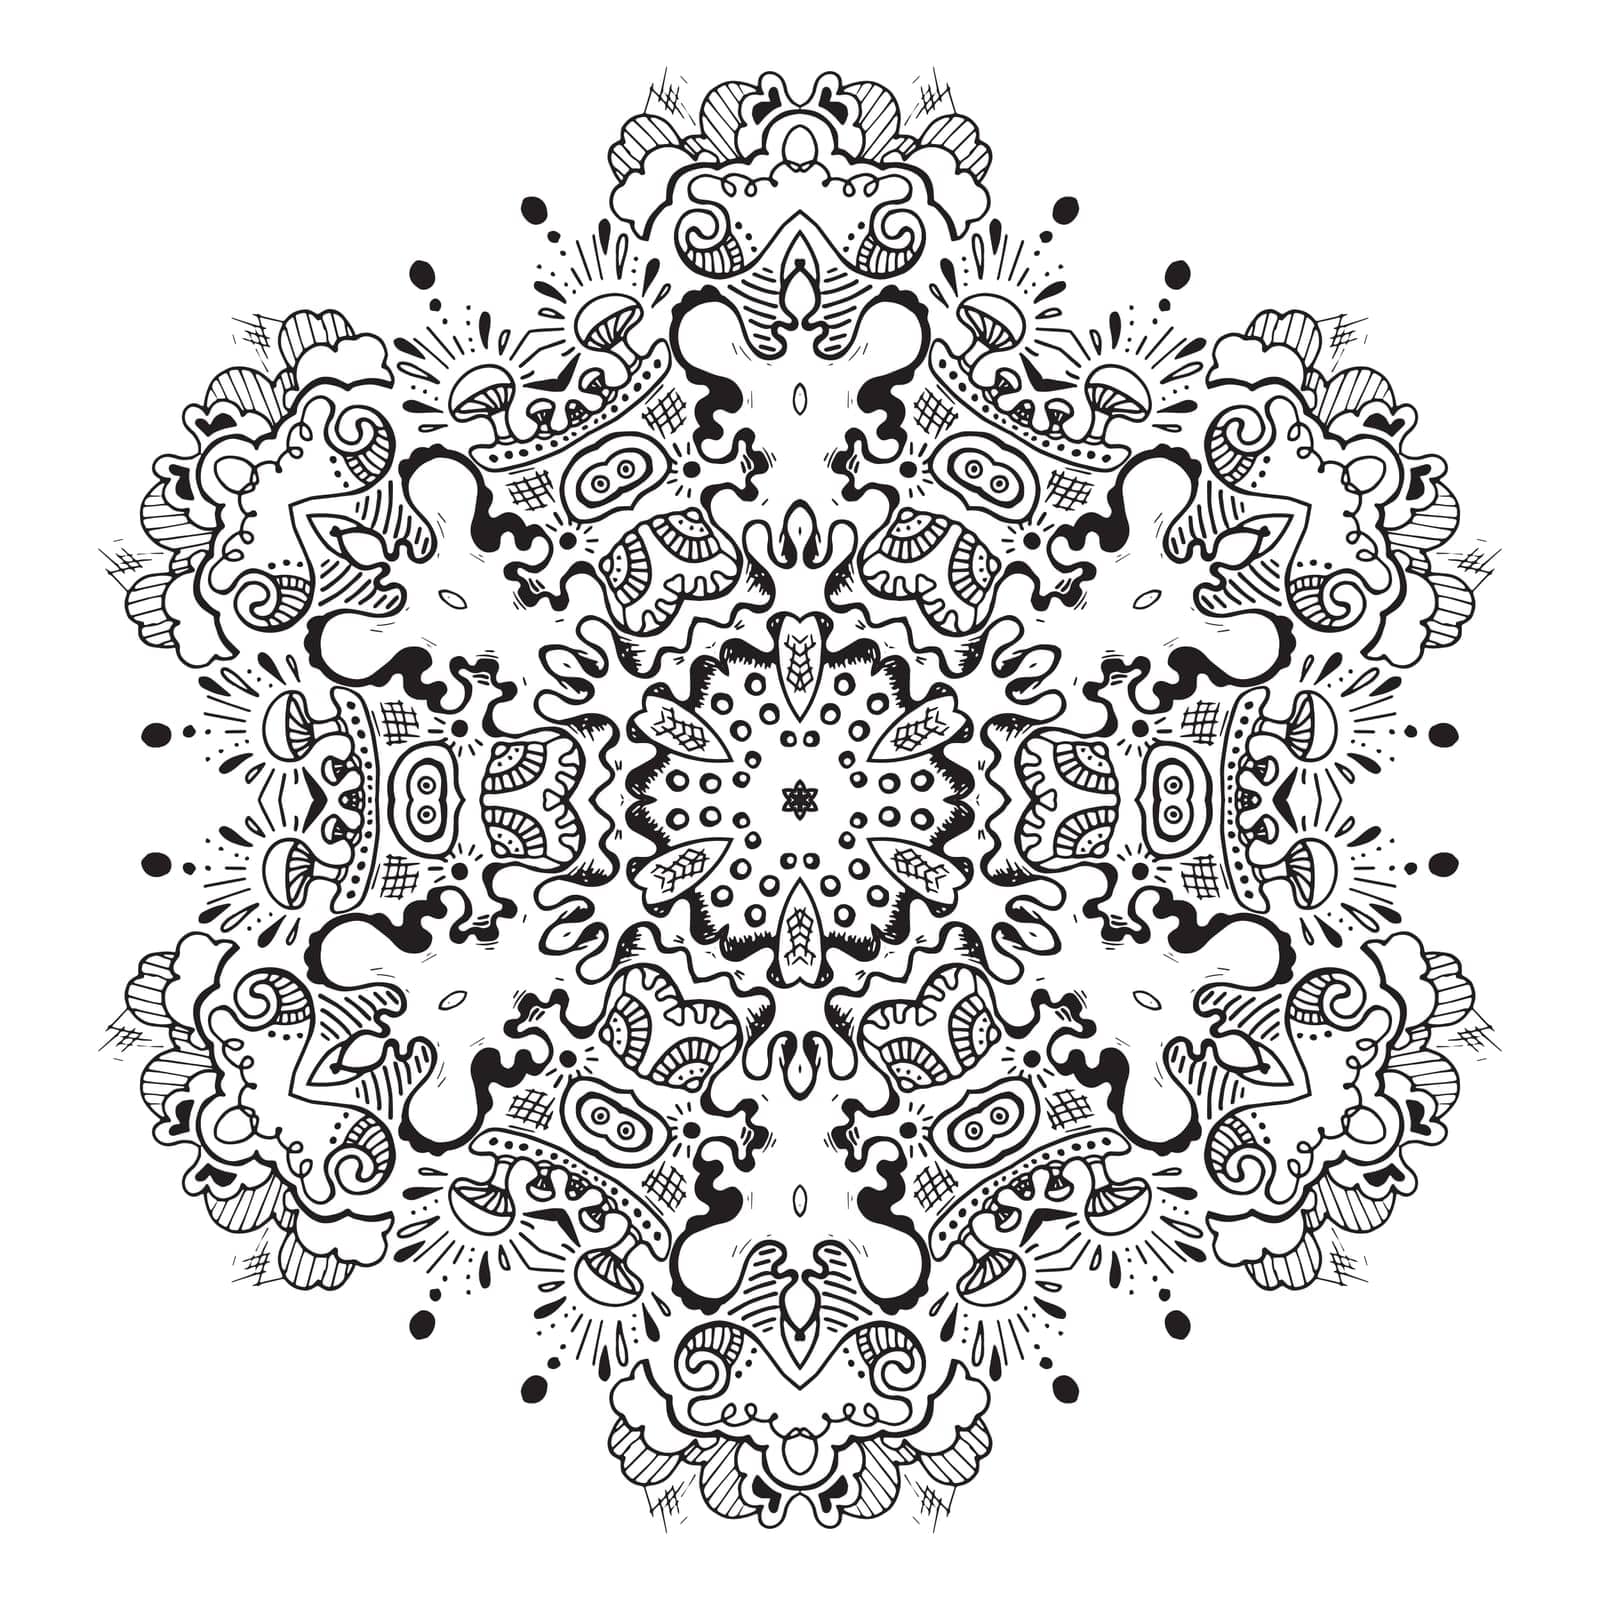 Handdrawn mandala for coloring book, lineart by Lullis